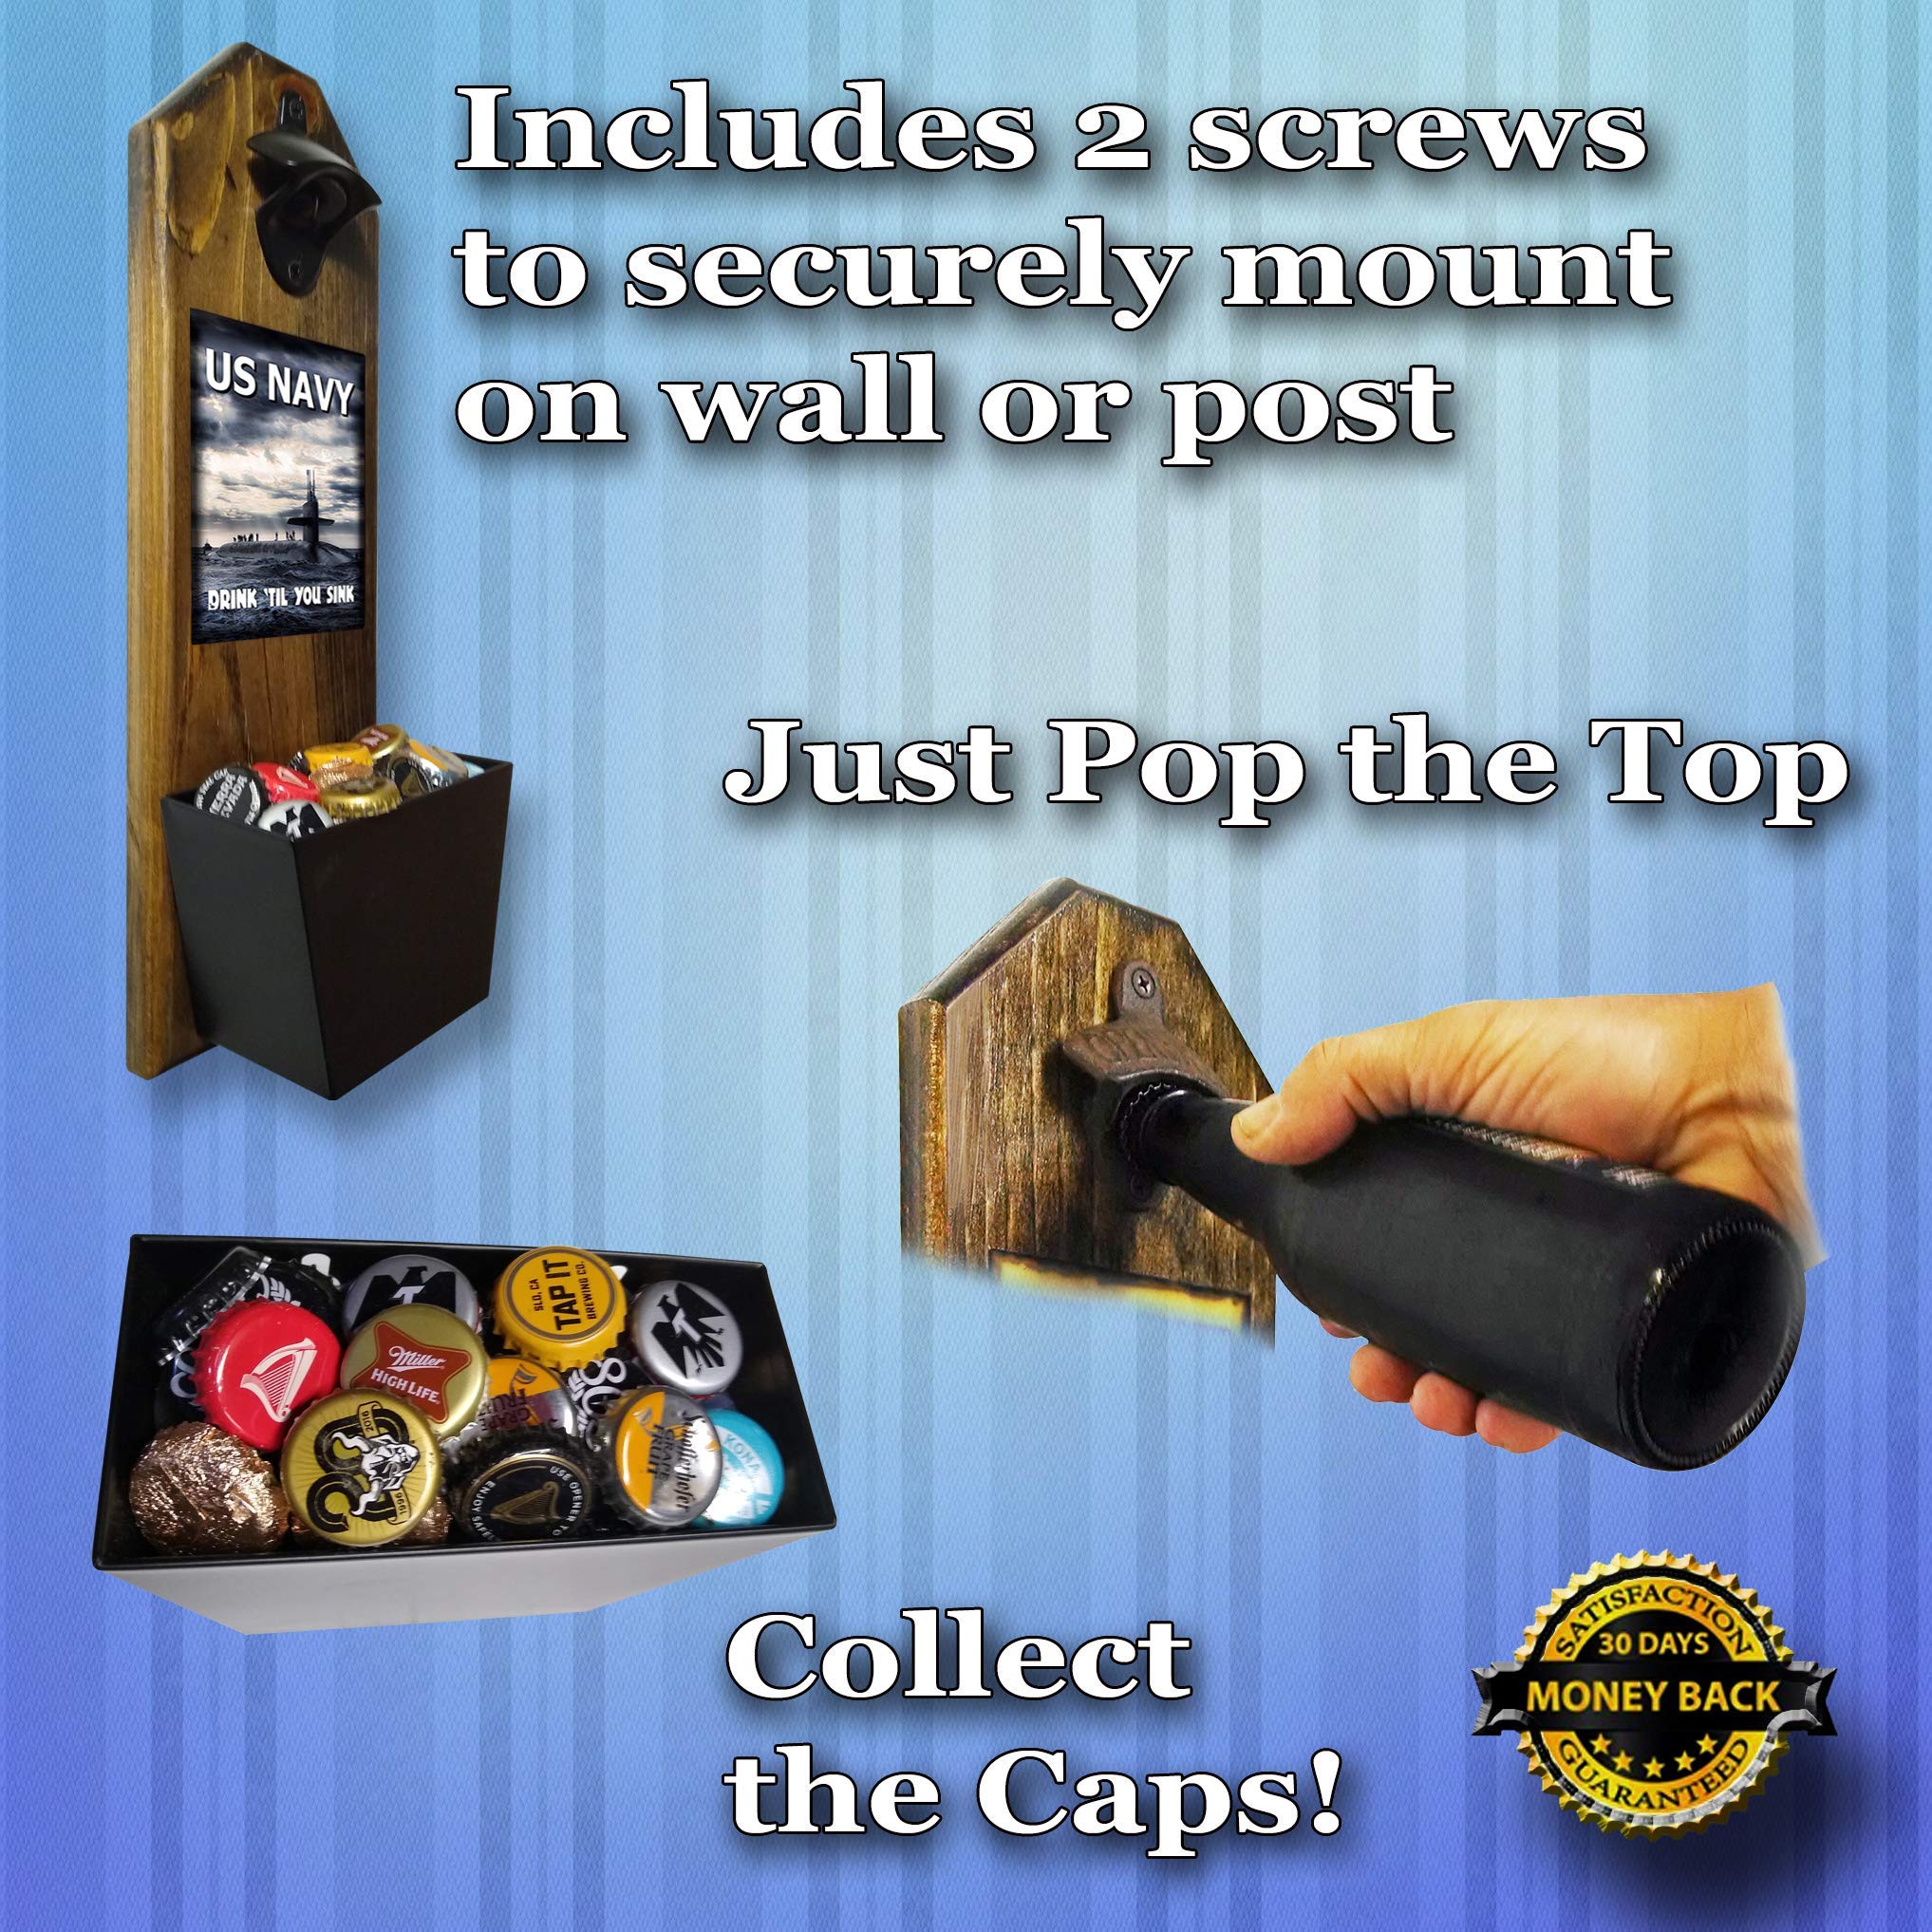 "U.S. Navy - Submarine Drink 'Til You Sink" Wall Mounted Bottle Opener and Cap Catcher - 100% Solid Pine 3/4" Thick - Slide On & Off Bucket - Great Sub/Sailor Gift! - By Vets 4 Vets